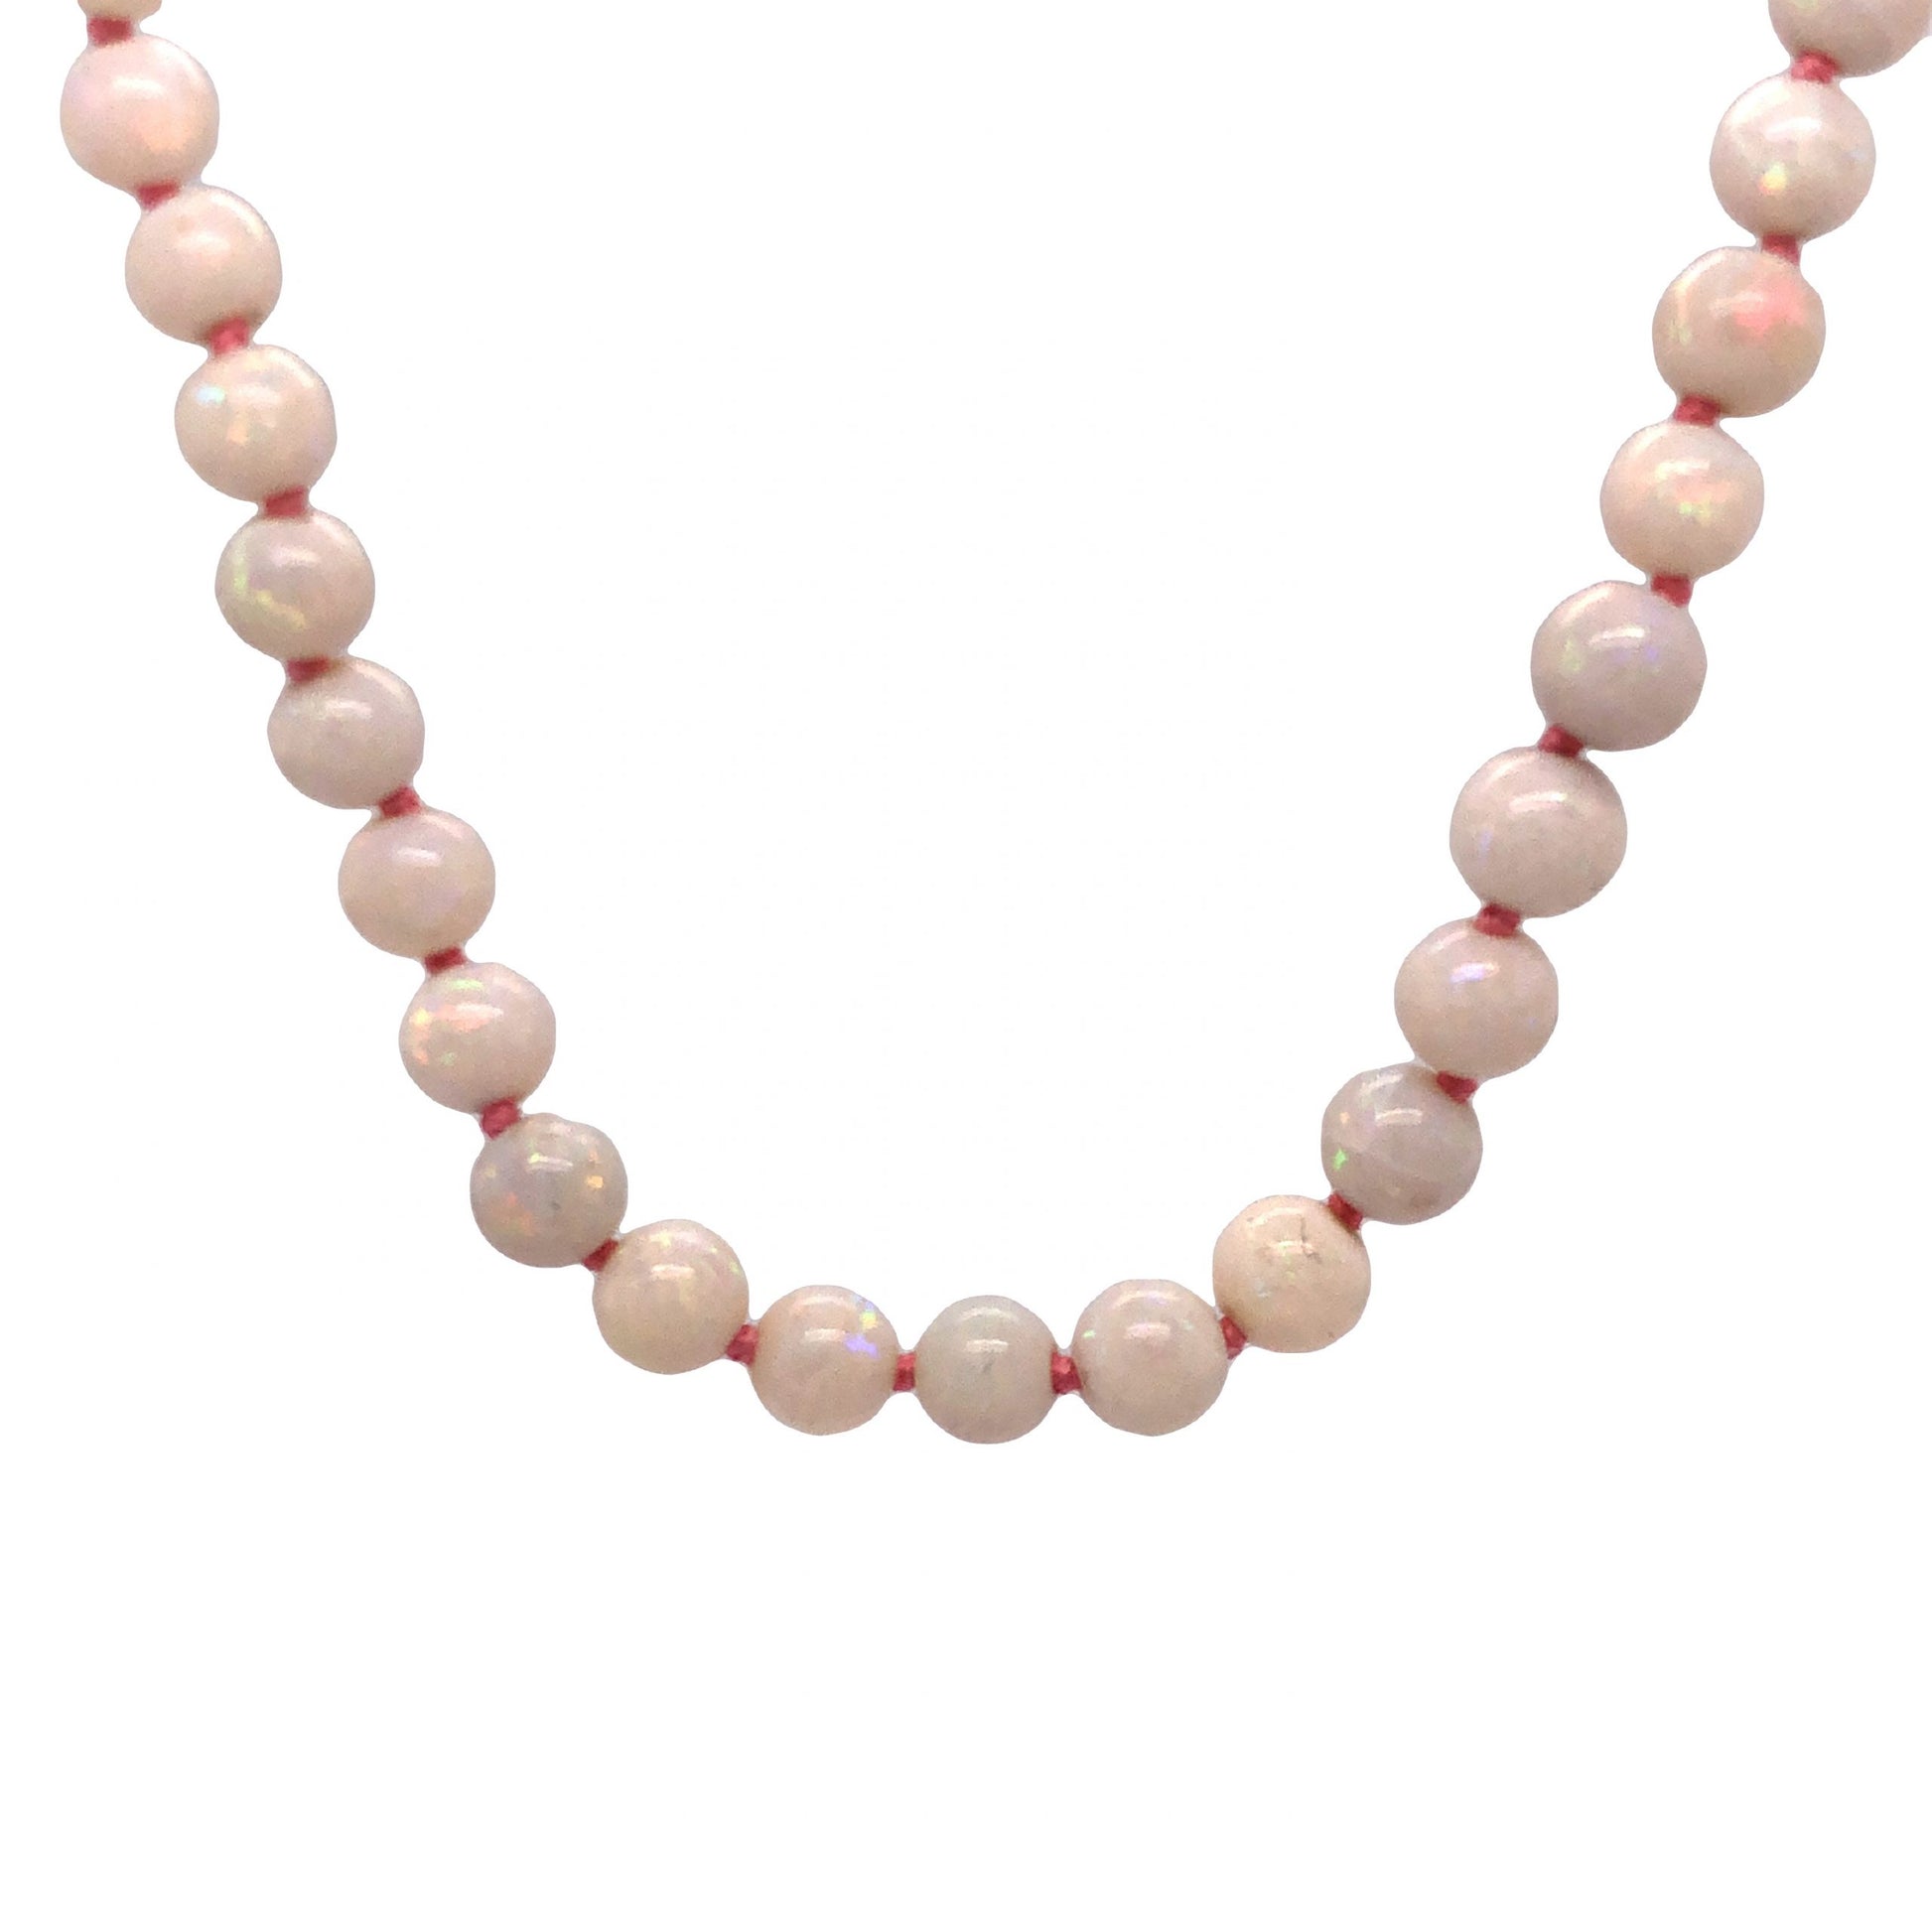 14 Inch Beaded Opal Necklace in 14k Yellow GoldComposition: PlatinumTotal Gram Weight: 14.9 gInscription: 585